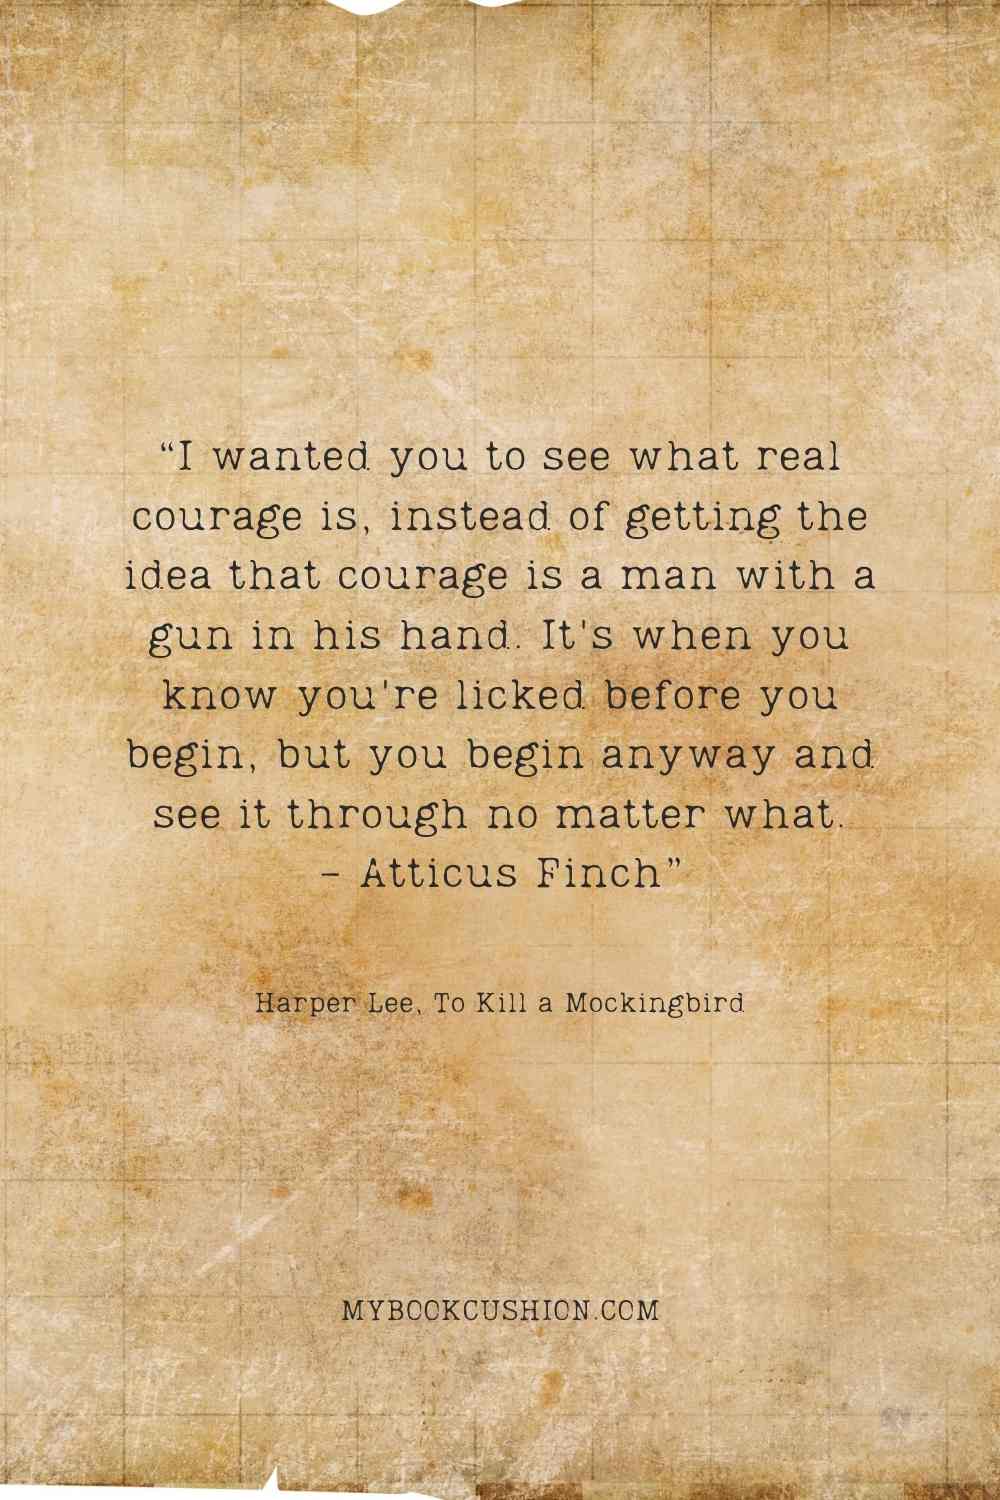 “I wanted you to see what real courage is, instead of getting the idea that courage is a man with a gun in his hand. It’s when you know you’re licked before you begin, but you begin anyway and see it through no matter what. – Atticus Finch” Harper Lee, To Kill a Mockingbird